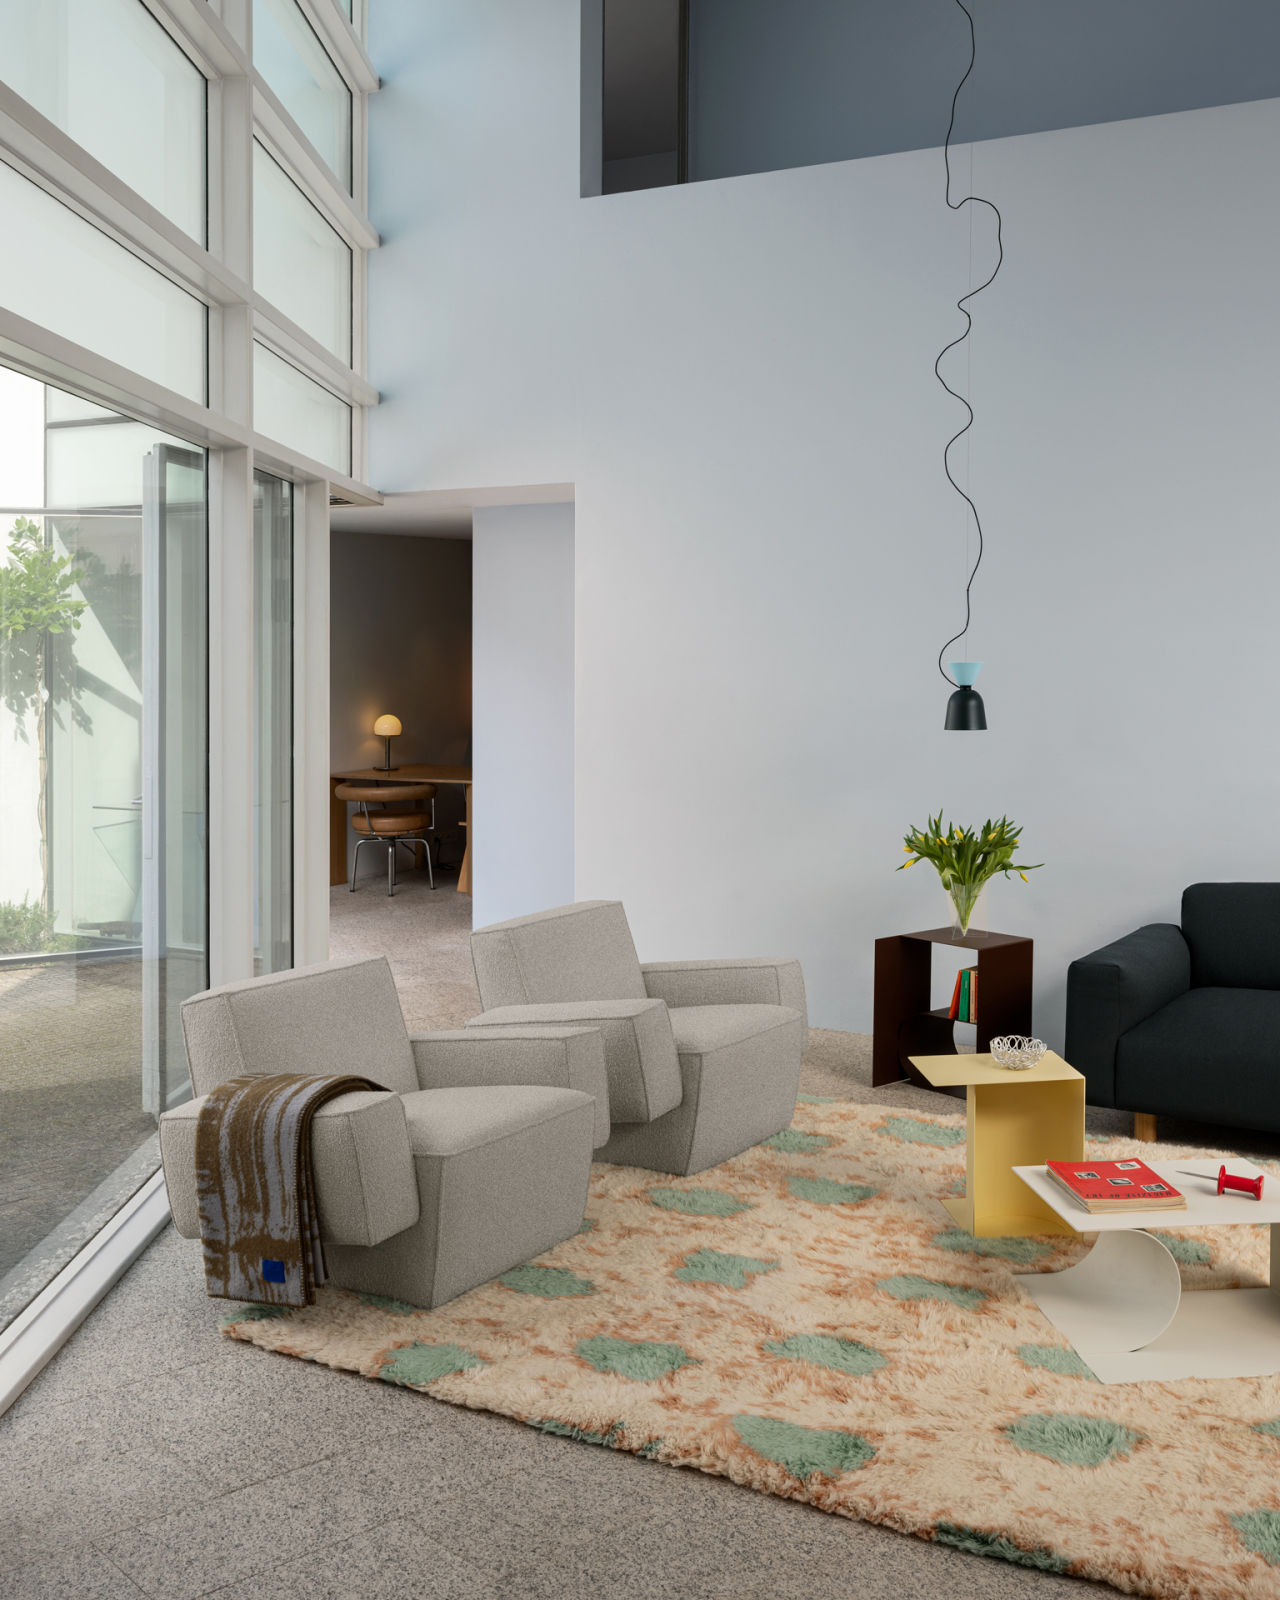 A lifestyle image of a living room scene featuring Hunk Lounge Chair with Armrests, Glitch Throw, Monster Rug, Alphabeta Pendant Light, Glyph Side Tables, and Koti Sofa.